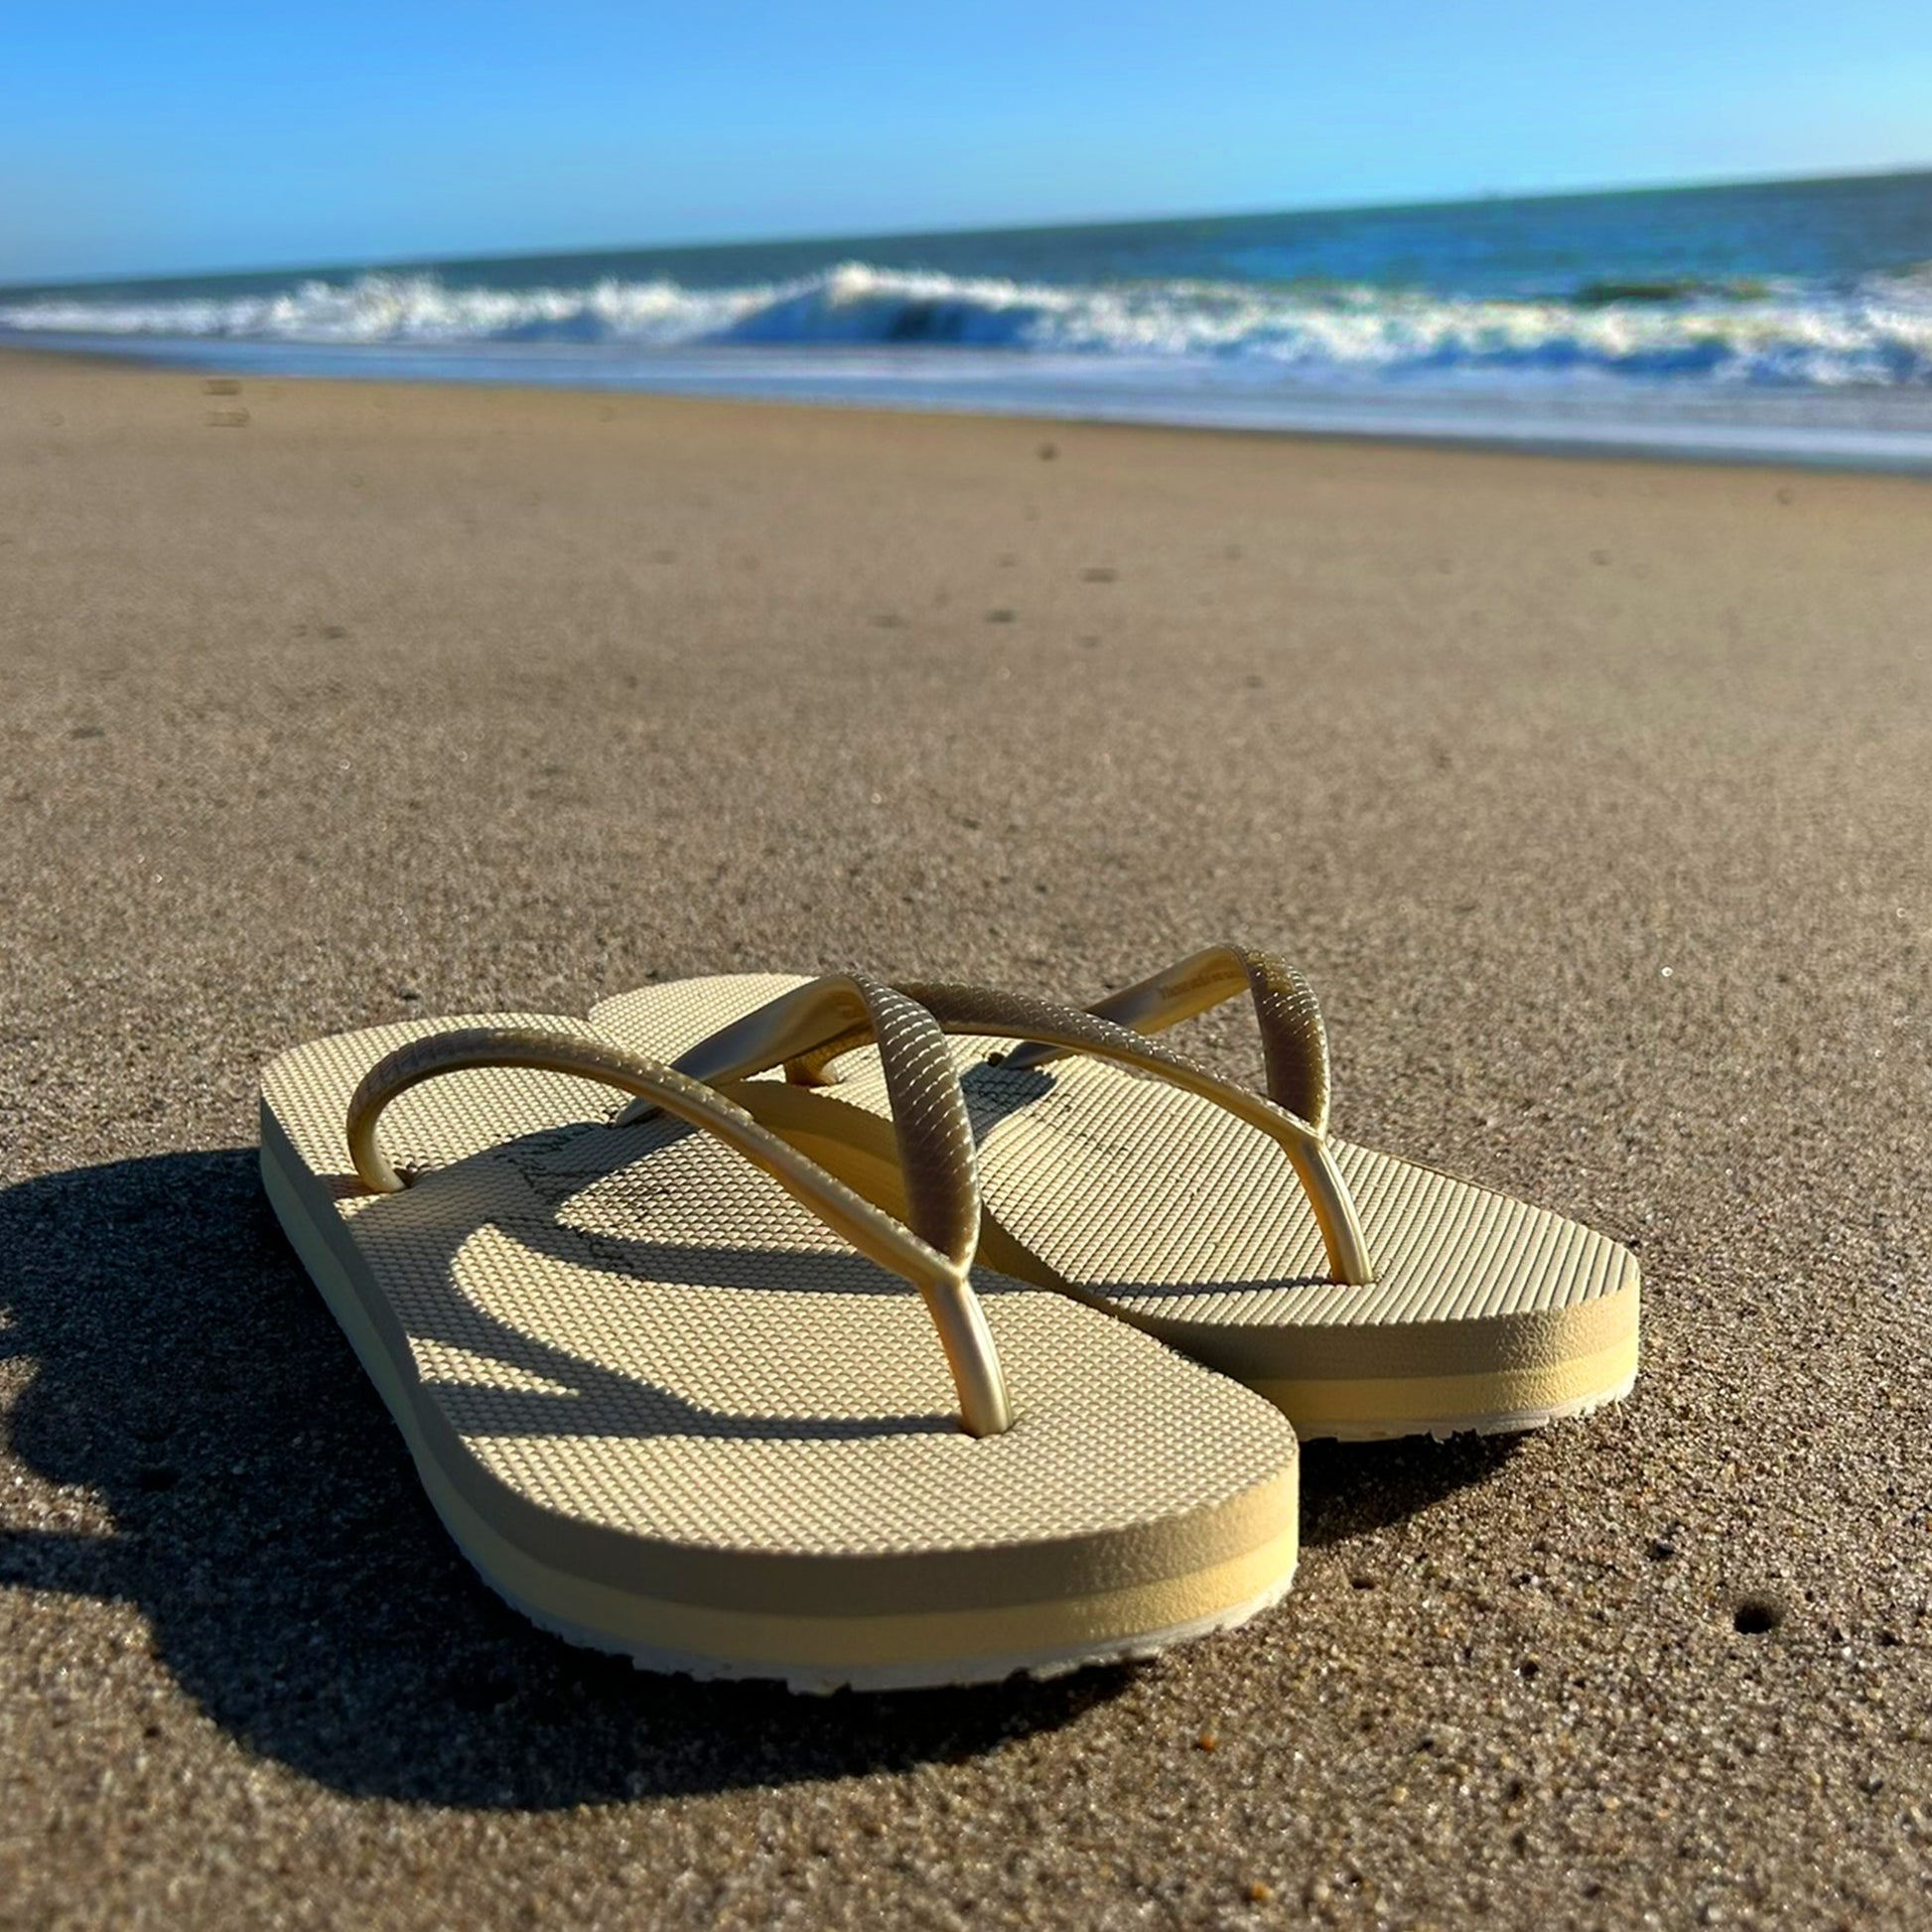 Malibu Jane gold flip flops feature 3 layer construction and arch support